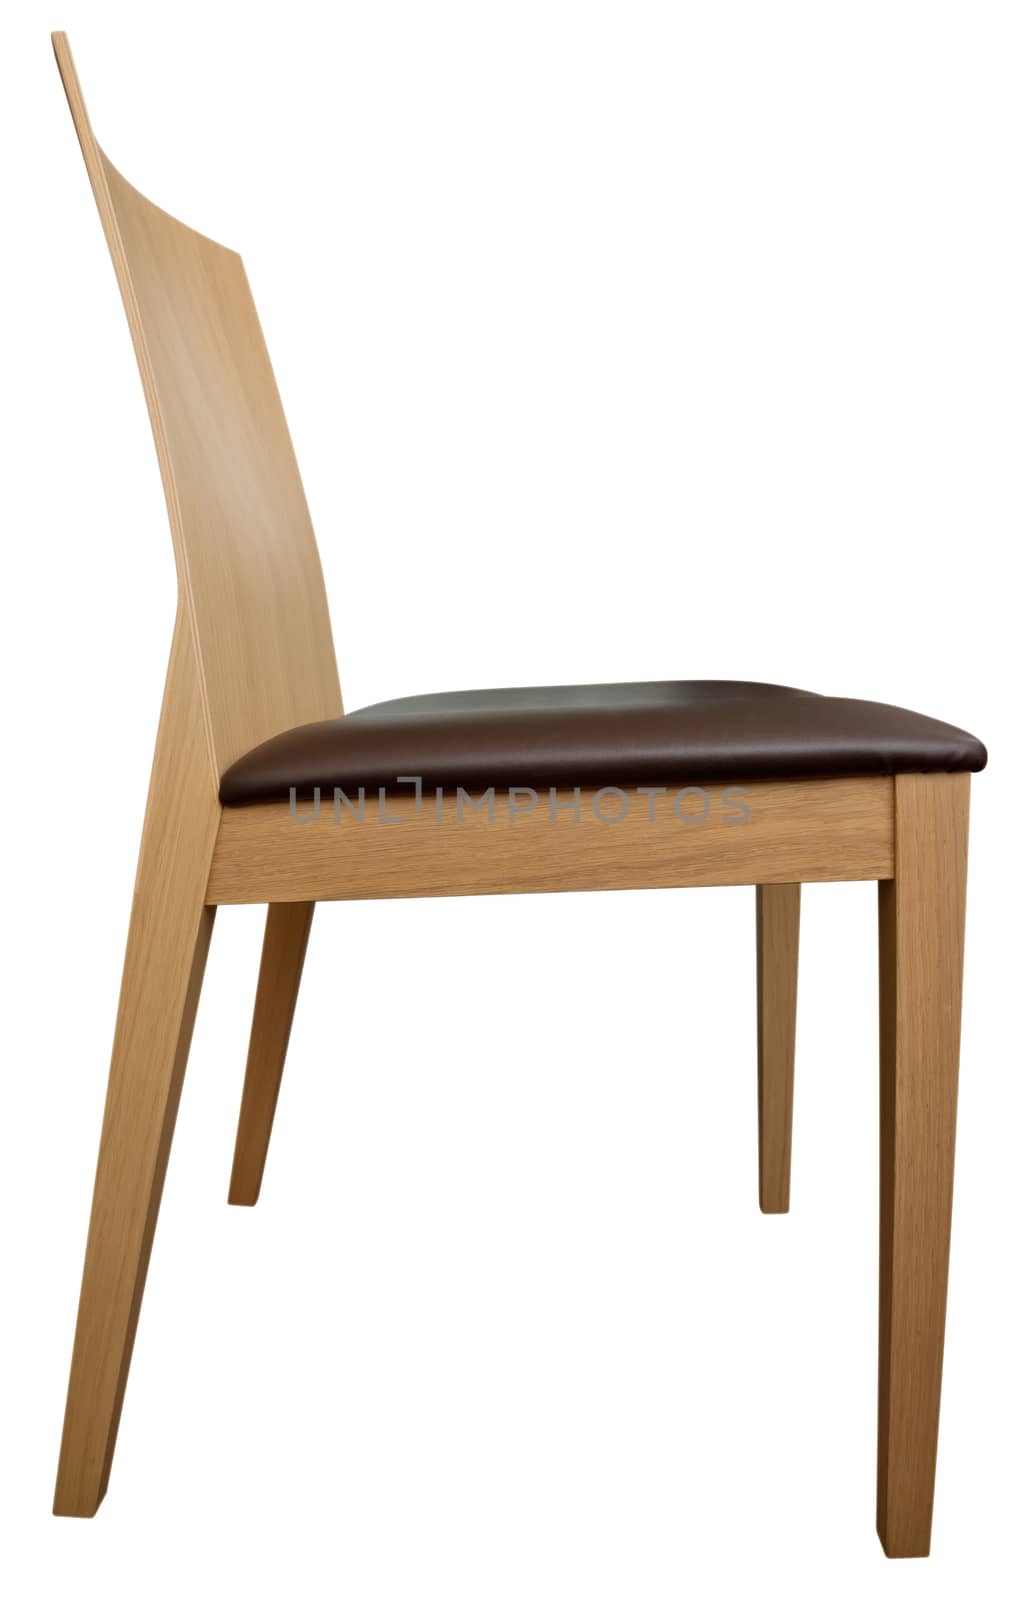 Wooden chair isolated on the white background. Clipping path included.